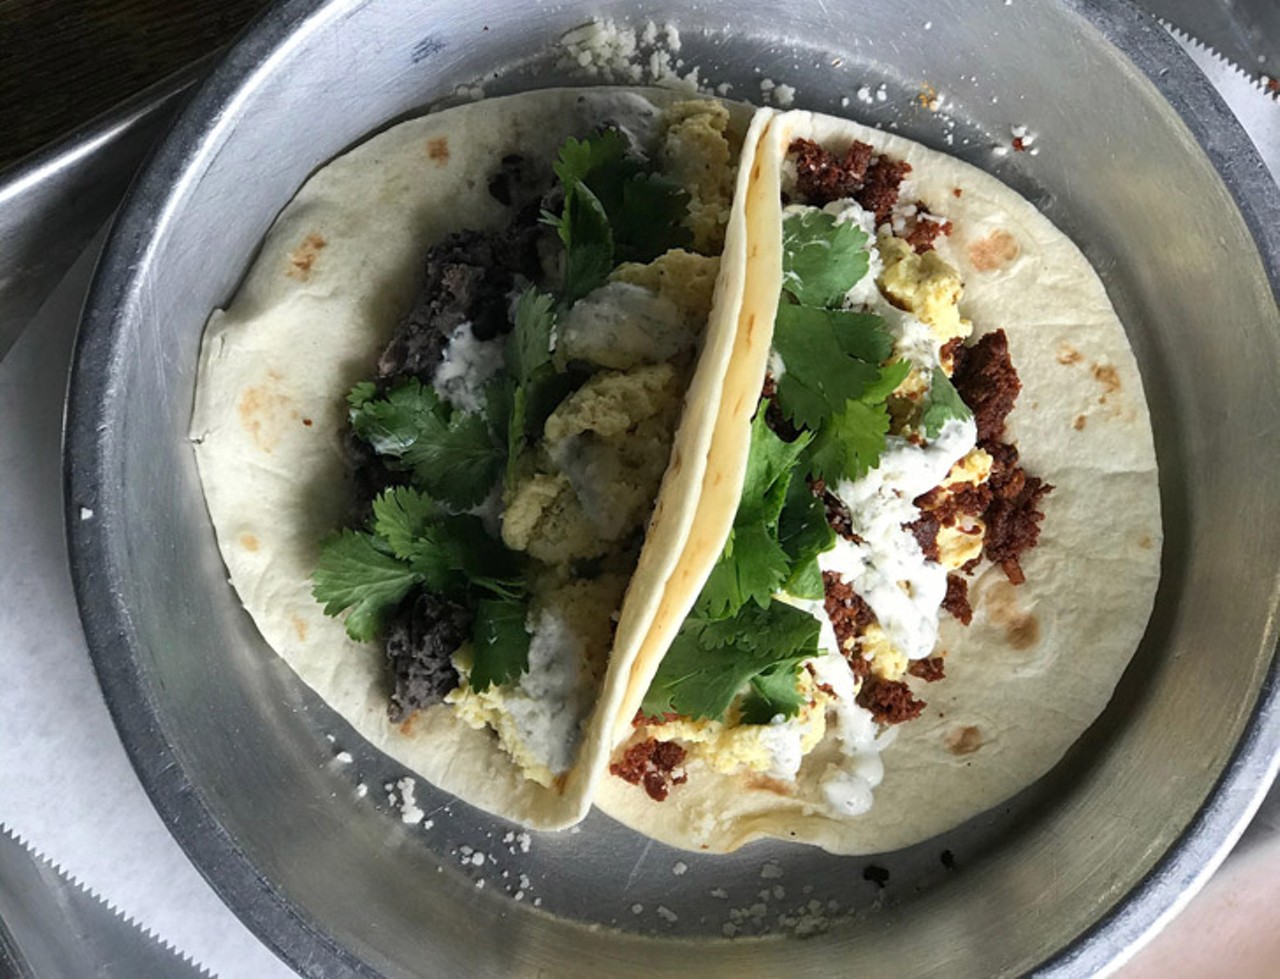 Se7en Bites   
617 Primrose Drive, 32803, 407-203-0727
Two of Either Breakfast Taco:
Black refried beans, egg, and cheese taco
Chorizo, egg, and cheese taco
Photo via Se7en Bites